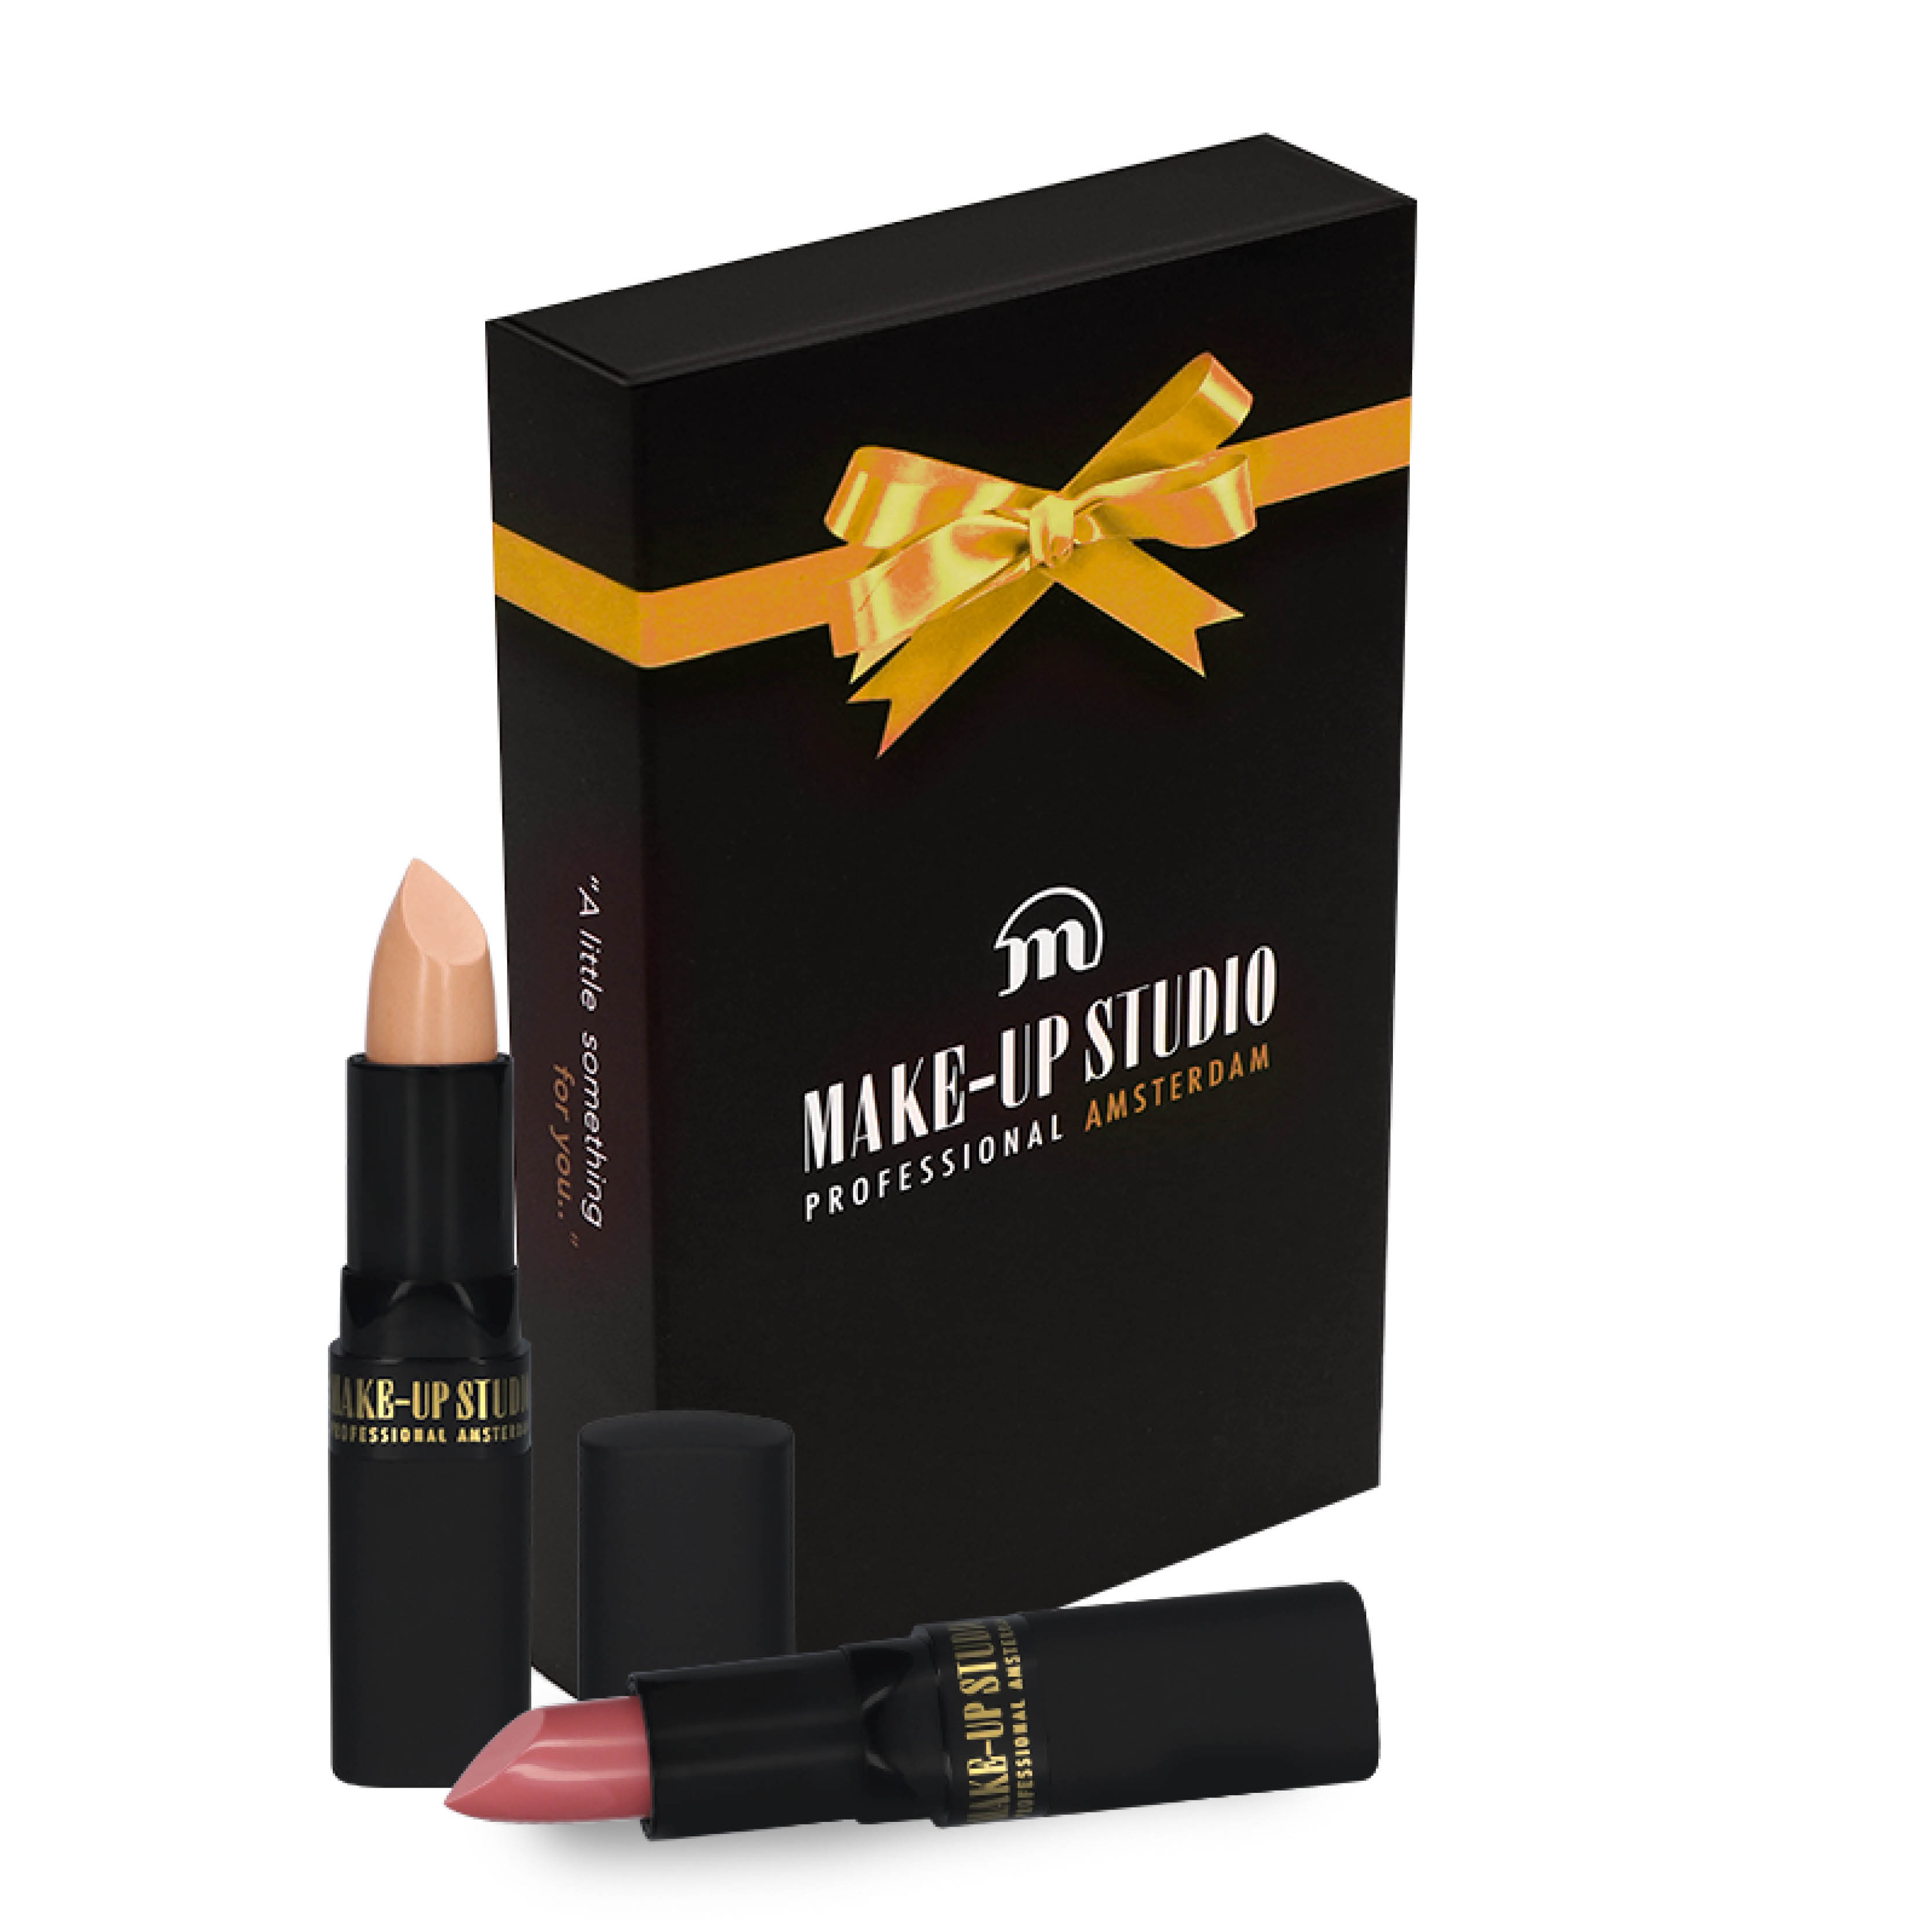 Shop all lip online! Make-up Studio Studio from Make-up products | Amsterdam